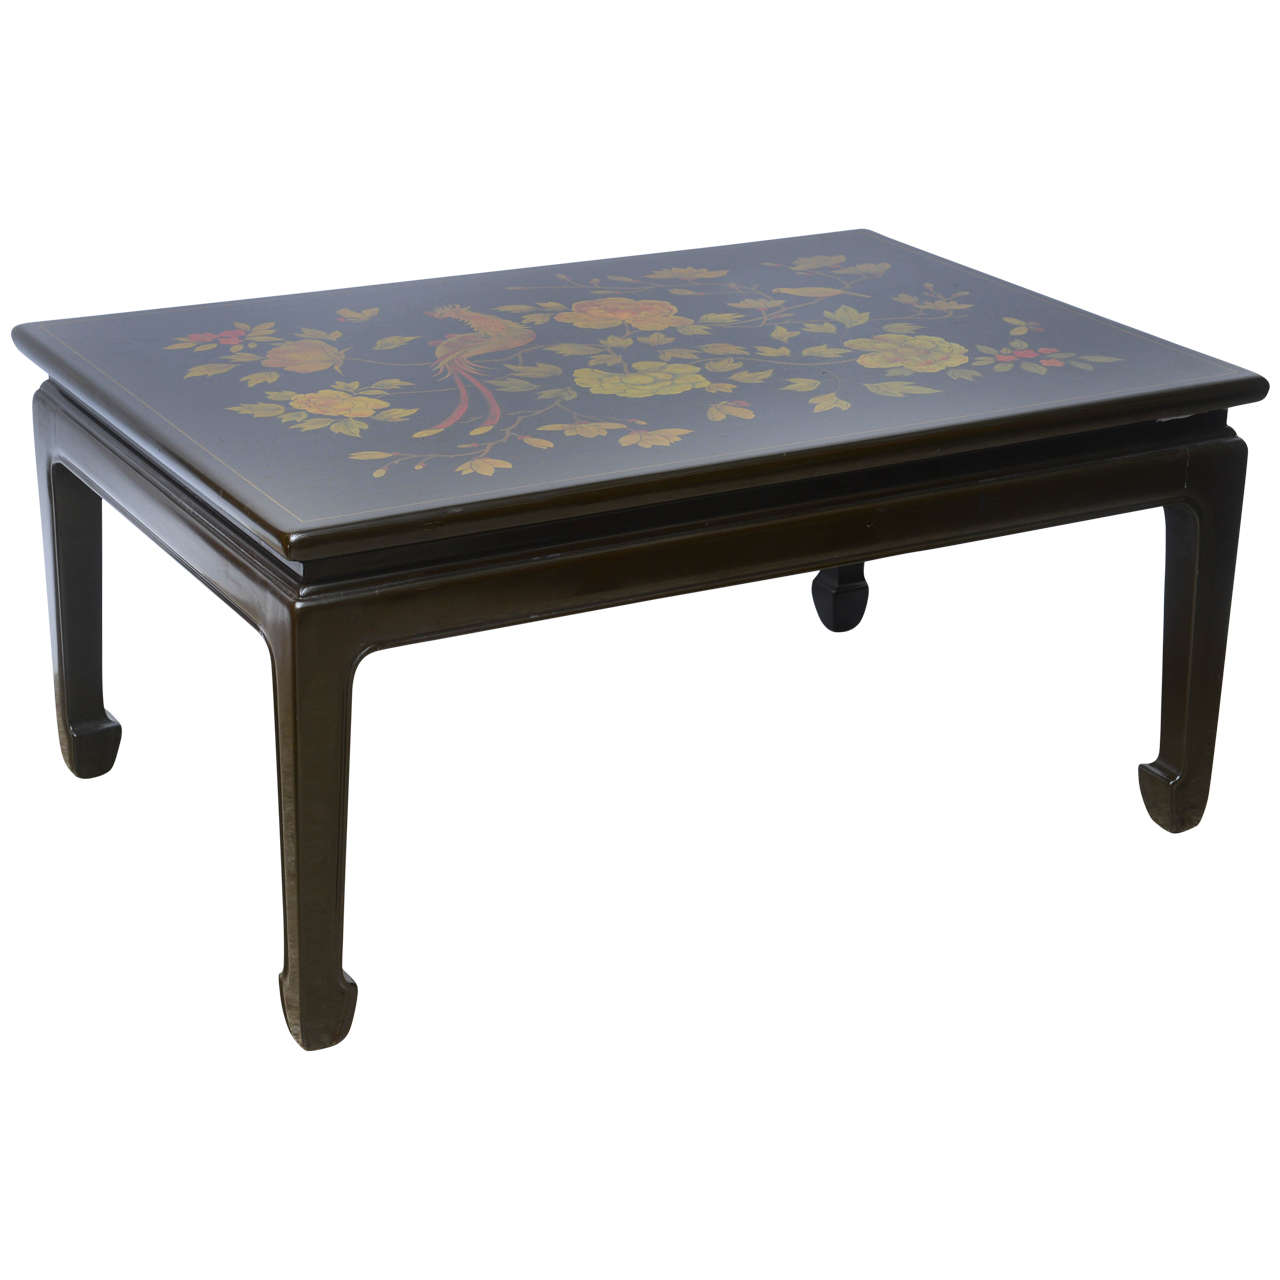 Chinese Low Lacquered Table, Hand-Decorated, 20th Century